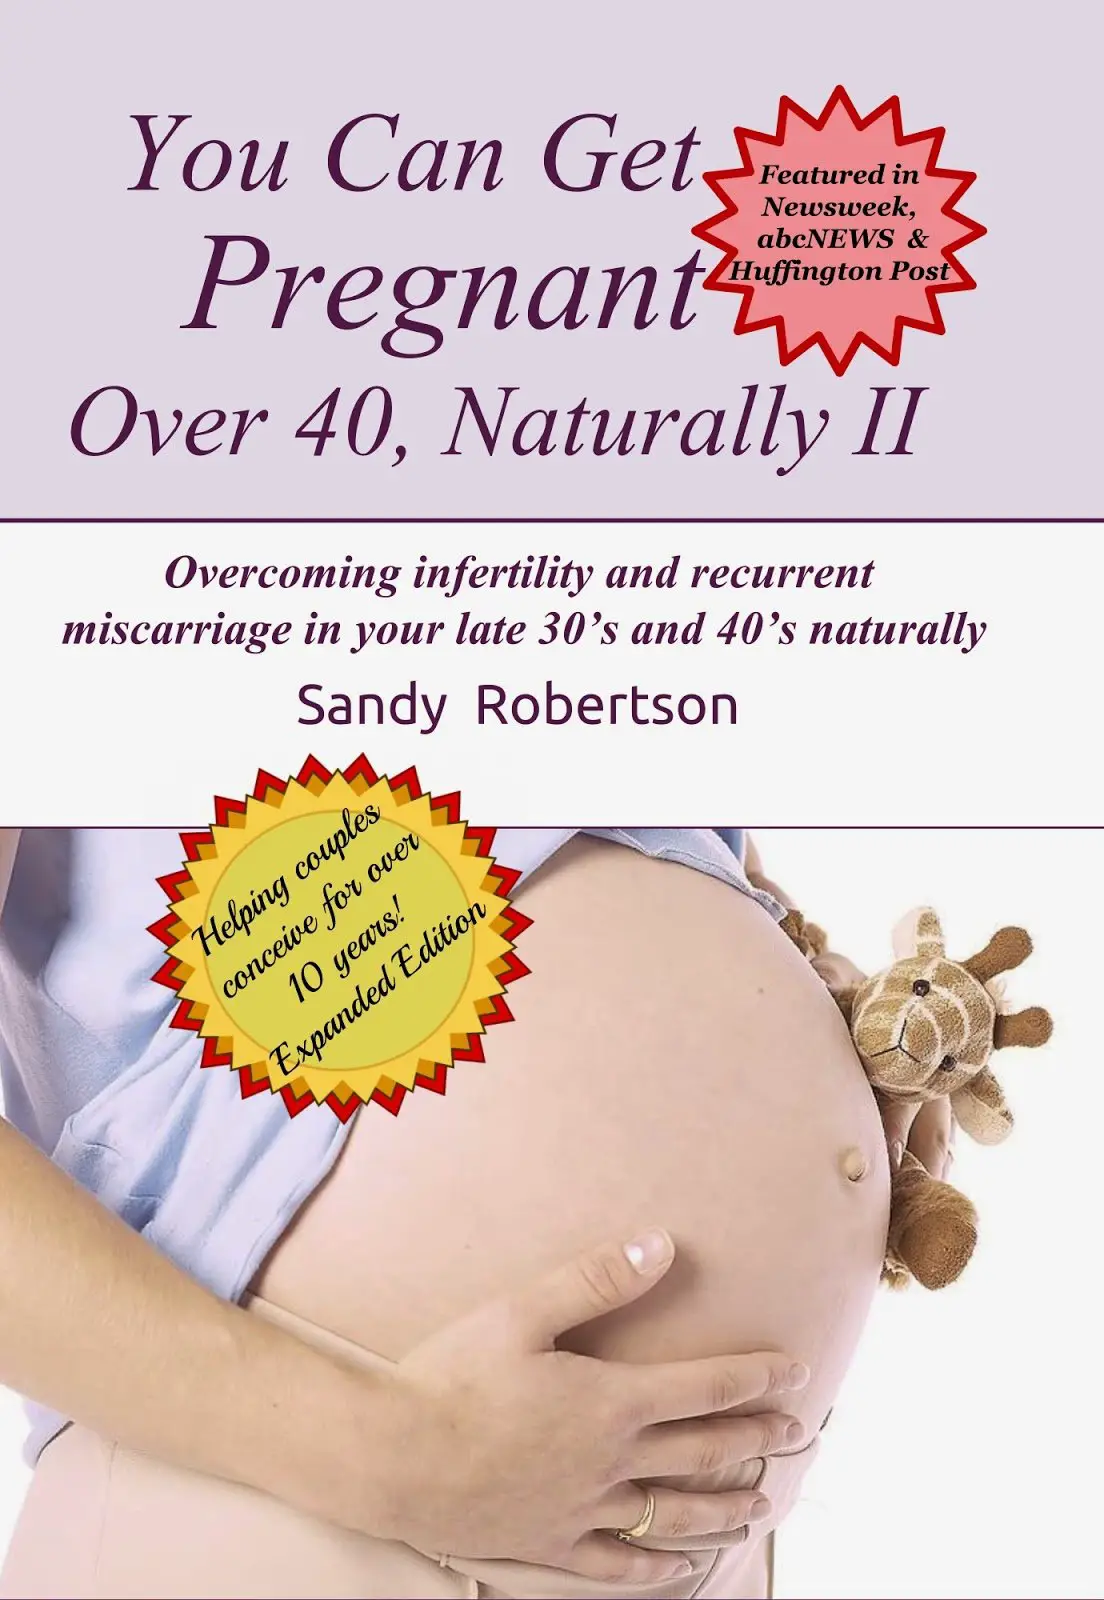 ANNOUNCING: NEW EDITION OF YOU CAN GET PREGNANT OVER 40 NATURALLY ...